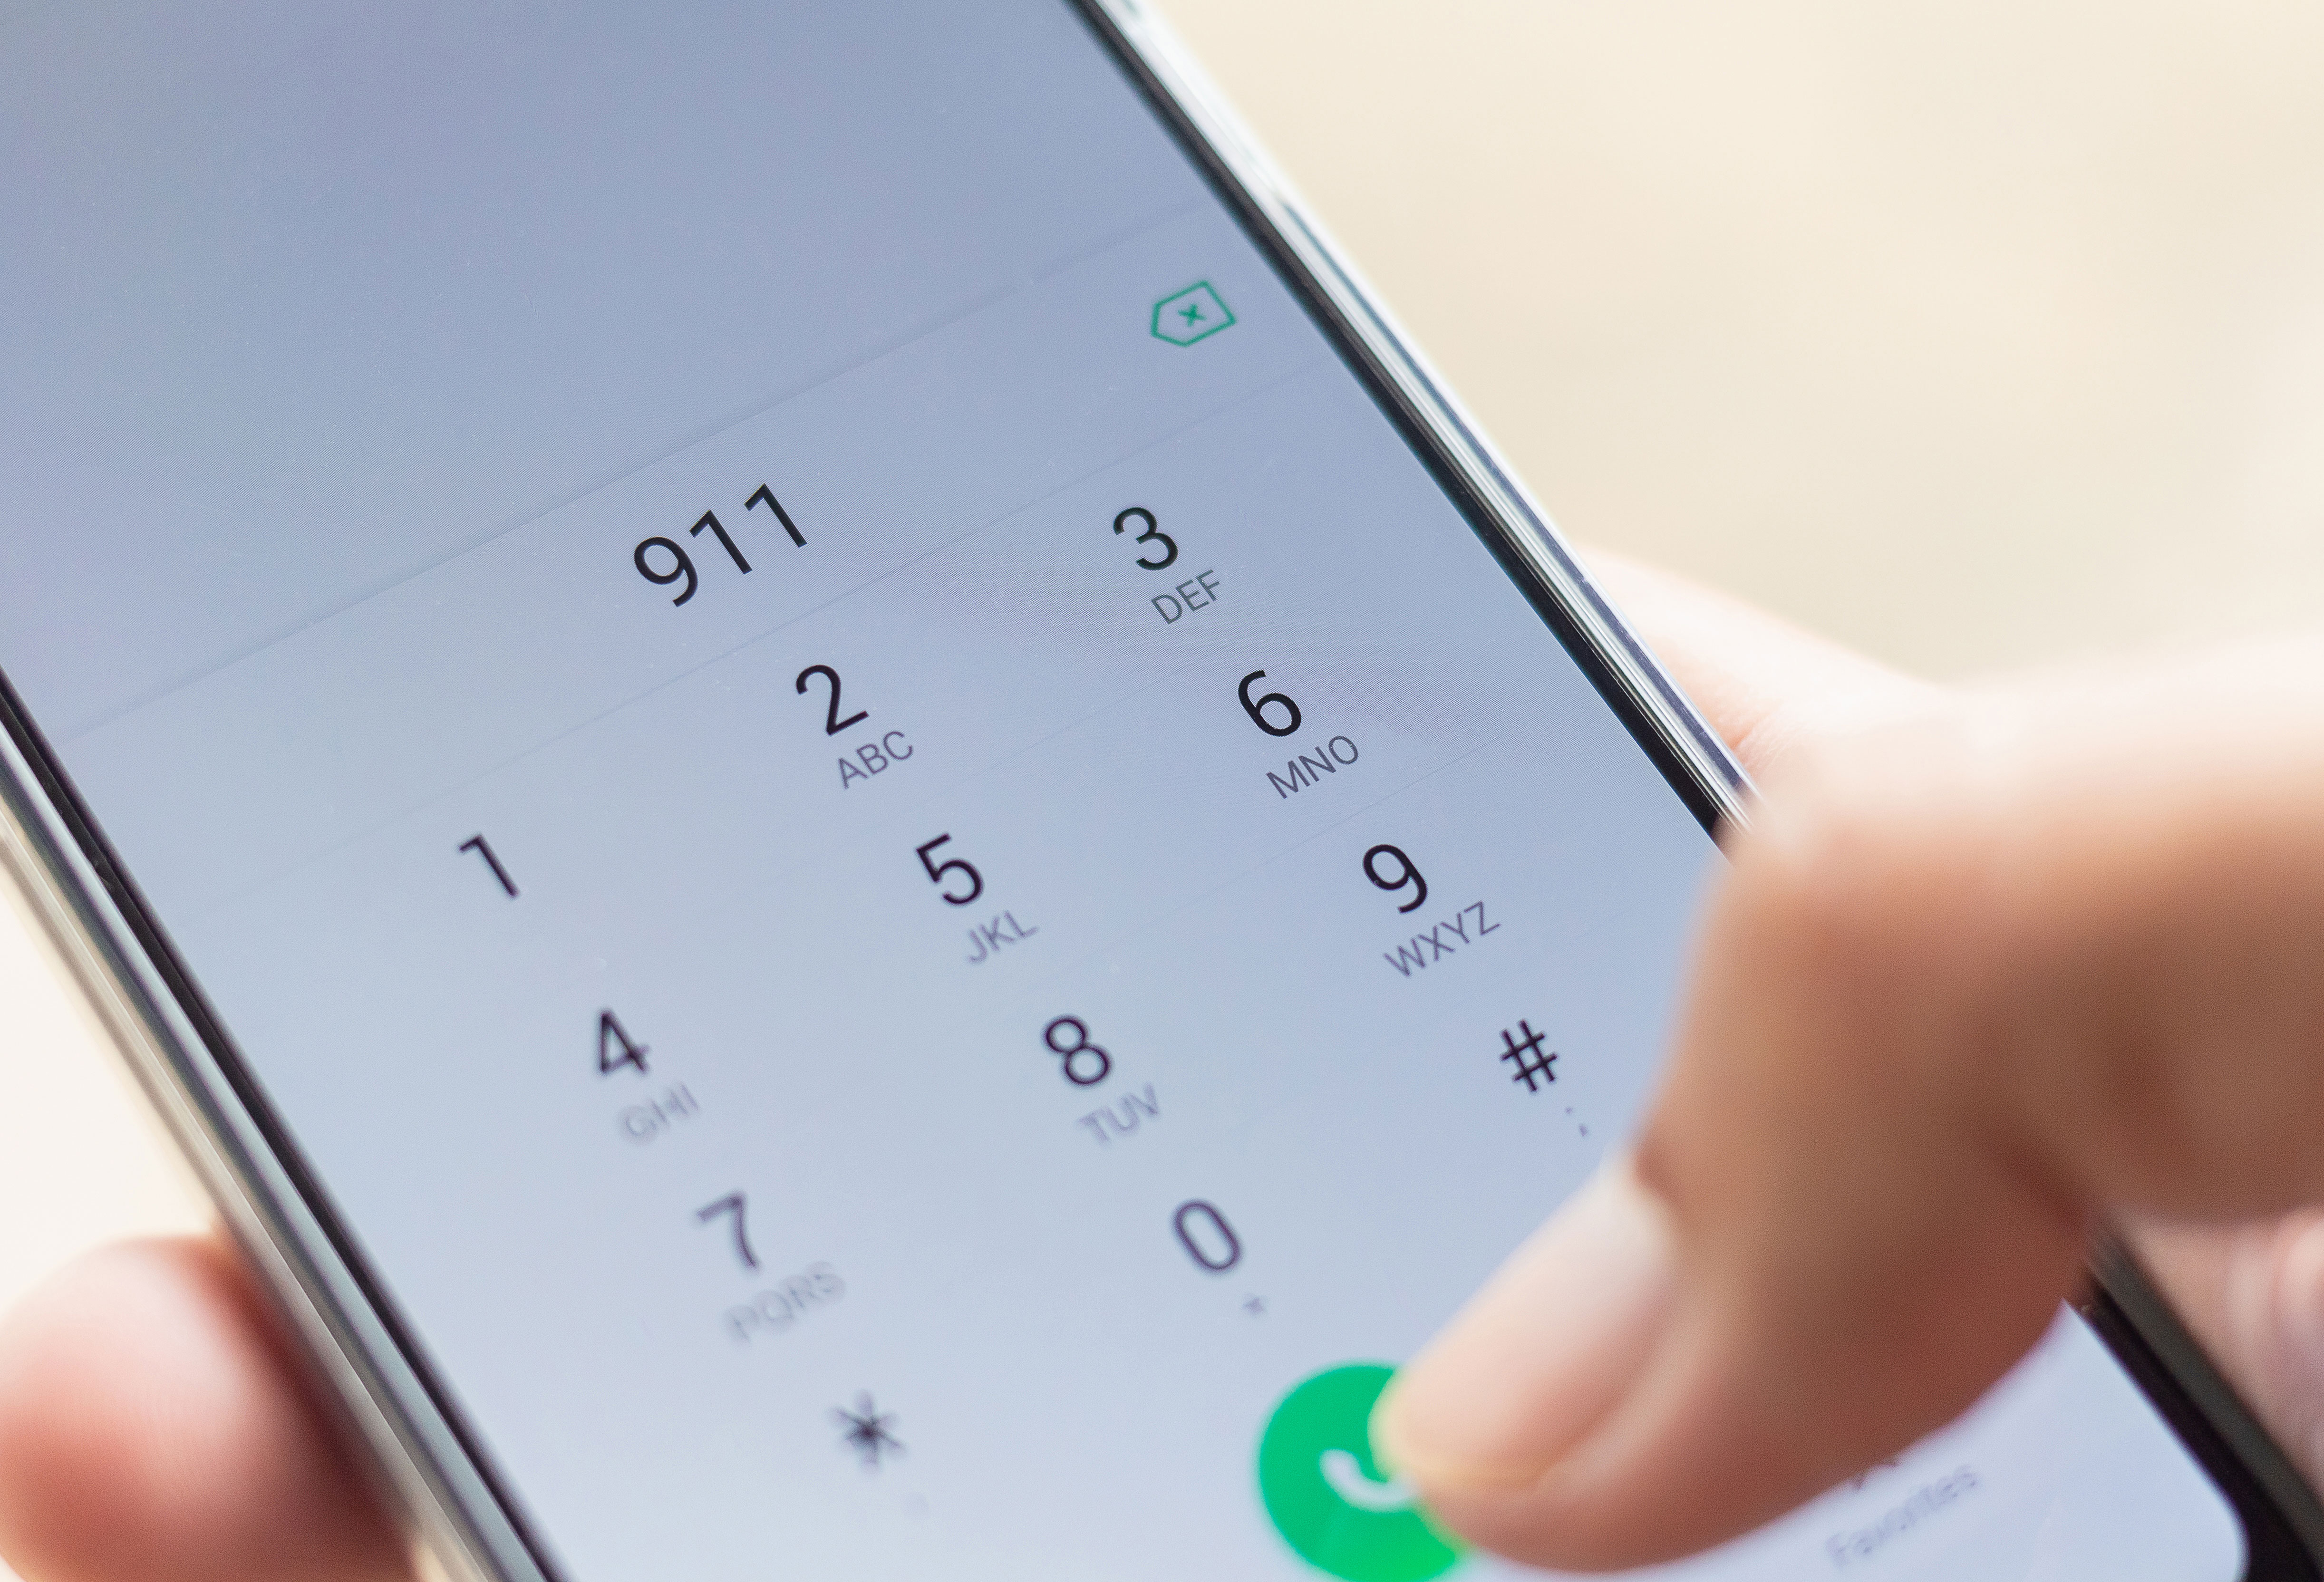 Dialing emergency number on a cell phone